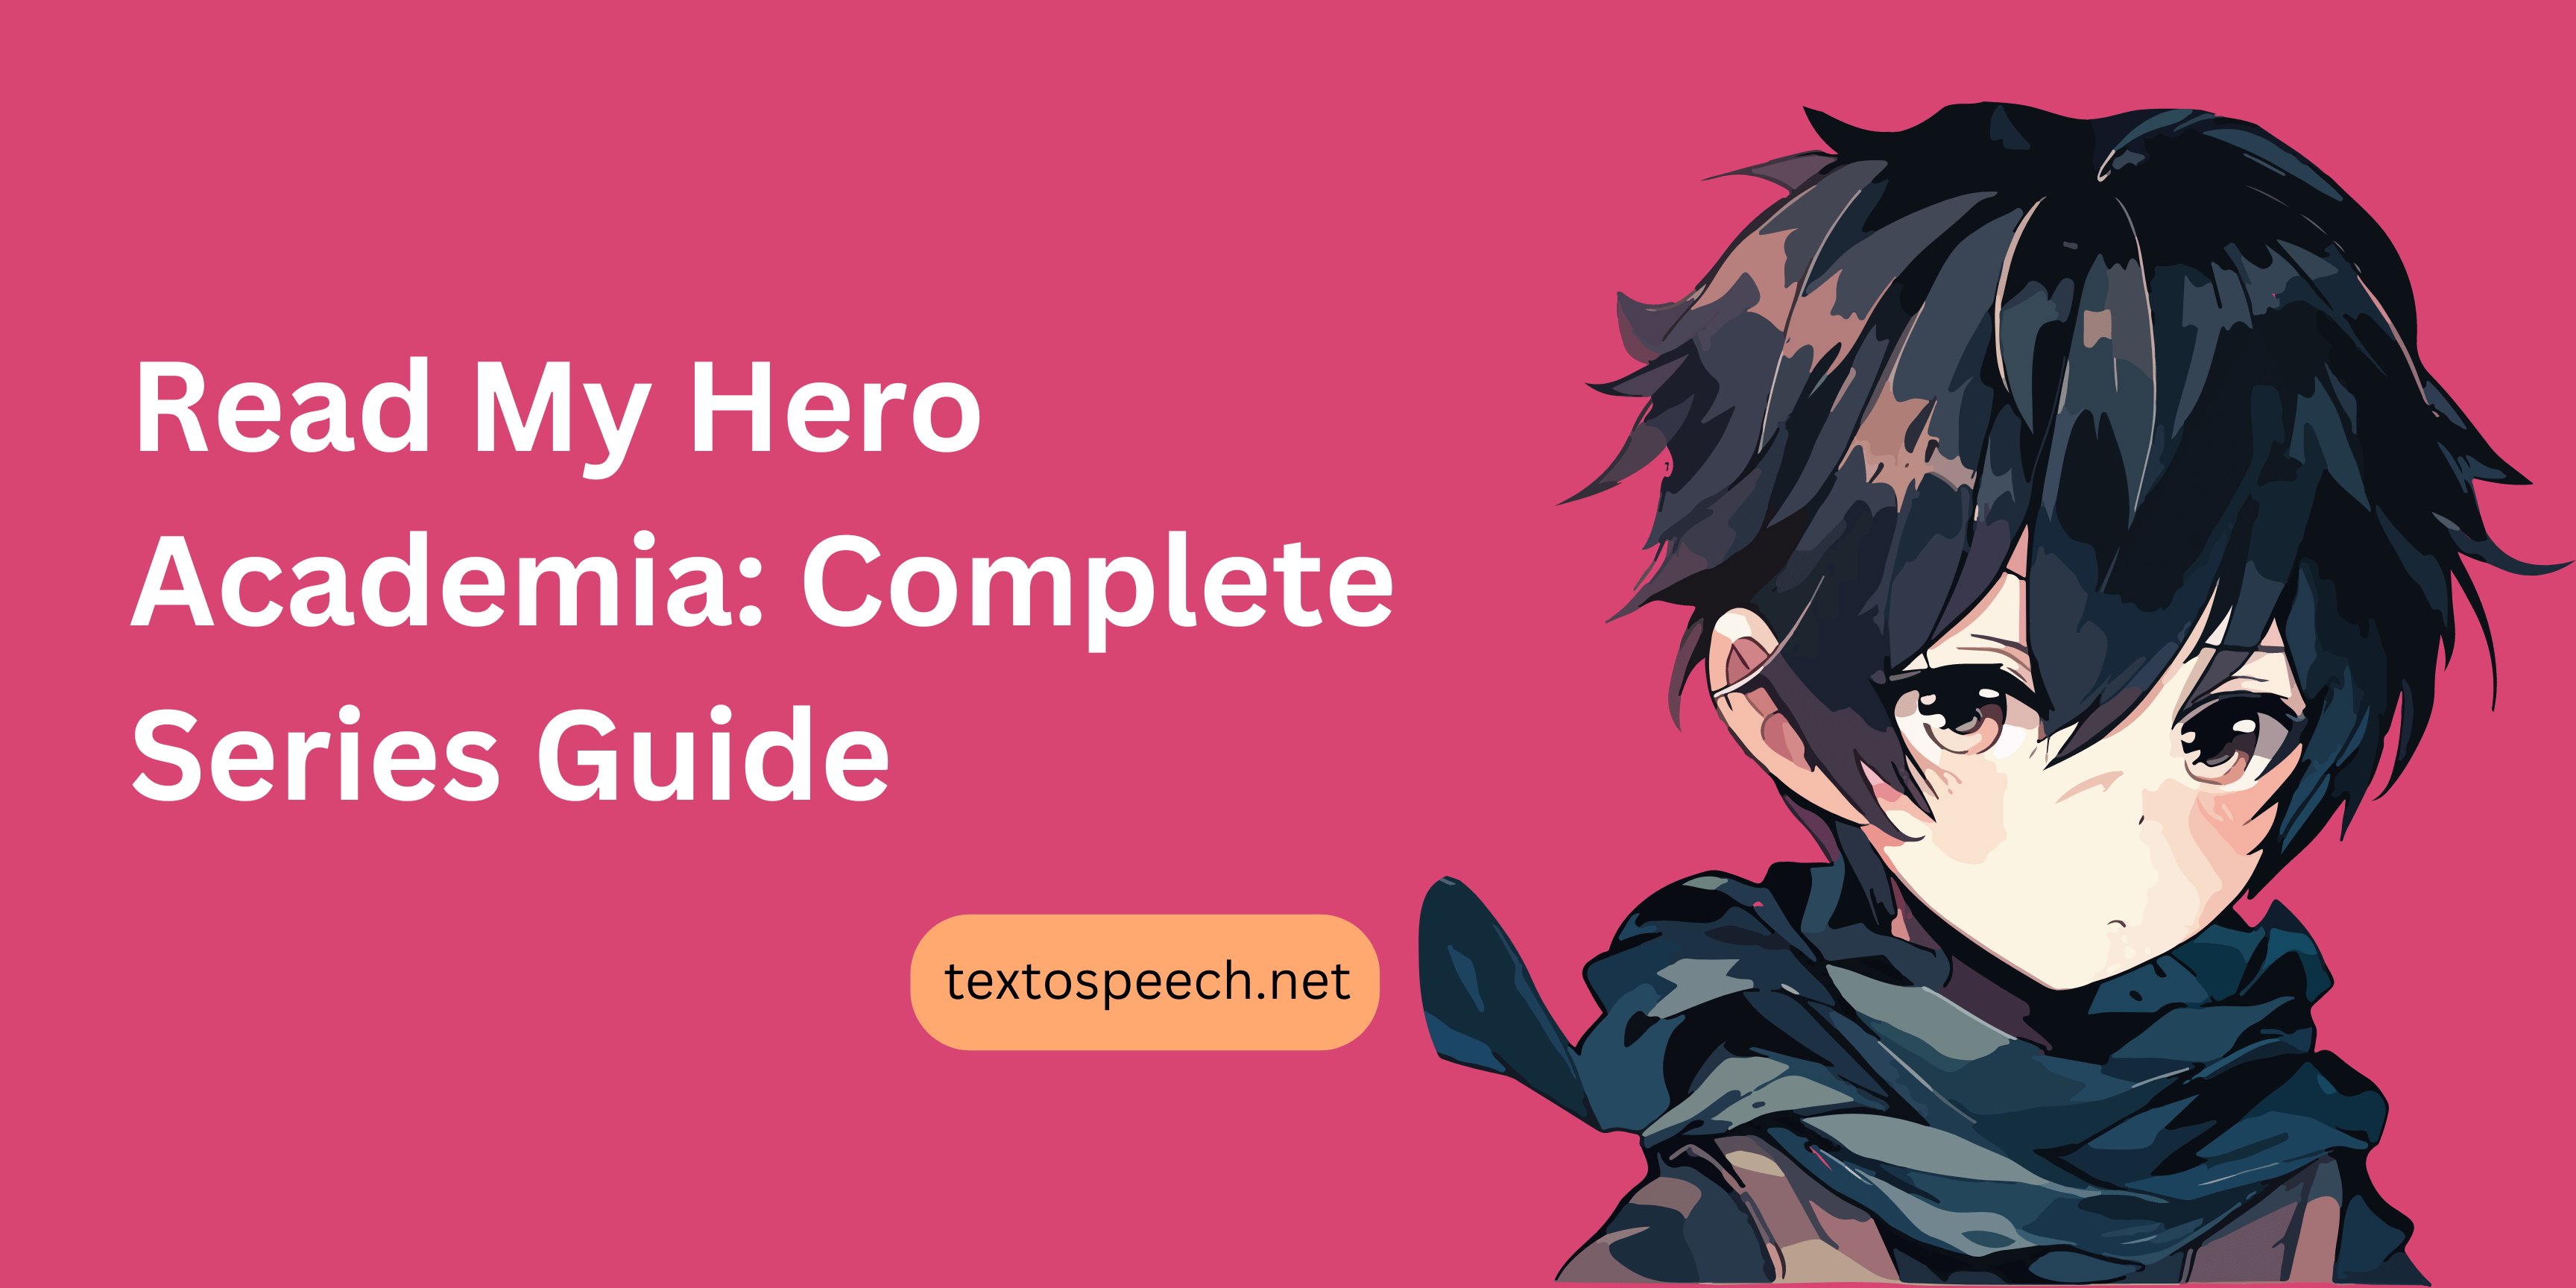 Read My Hero Academia: Complete Series Guide